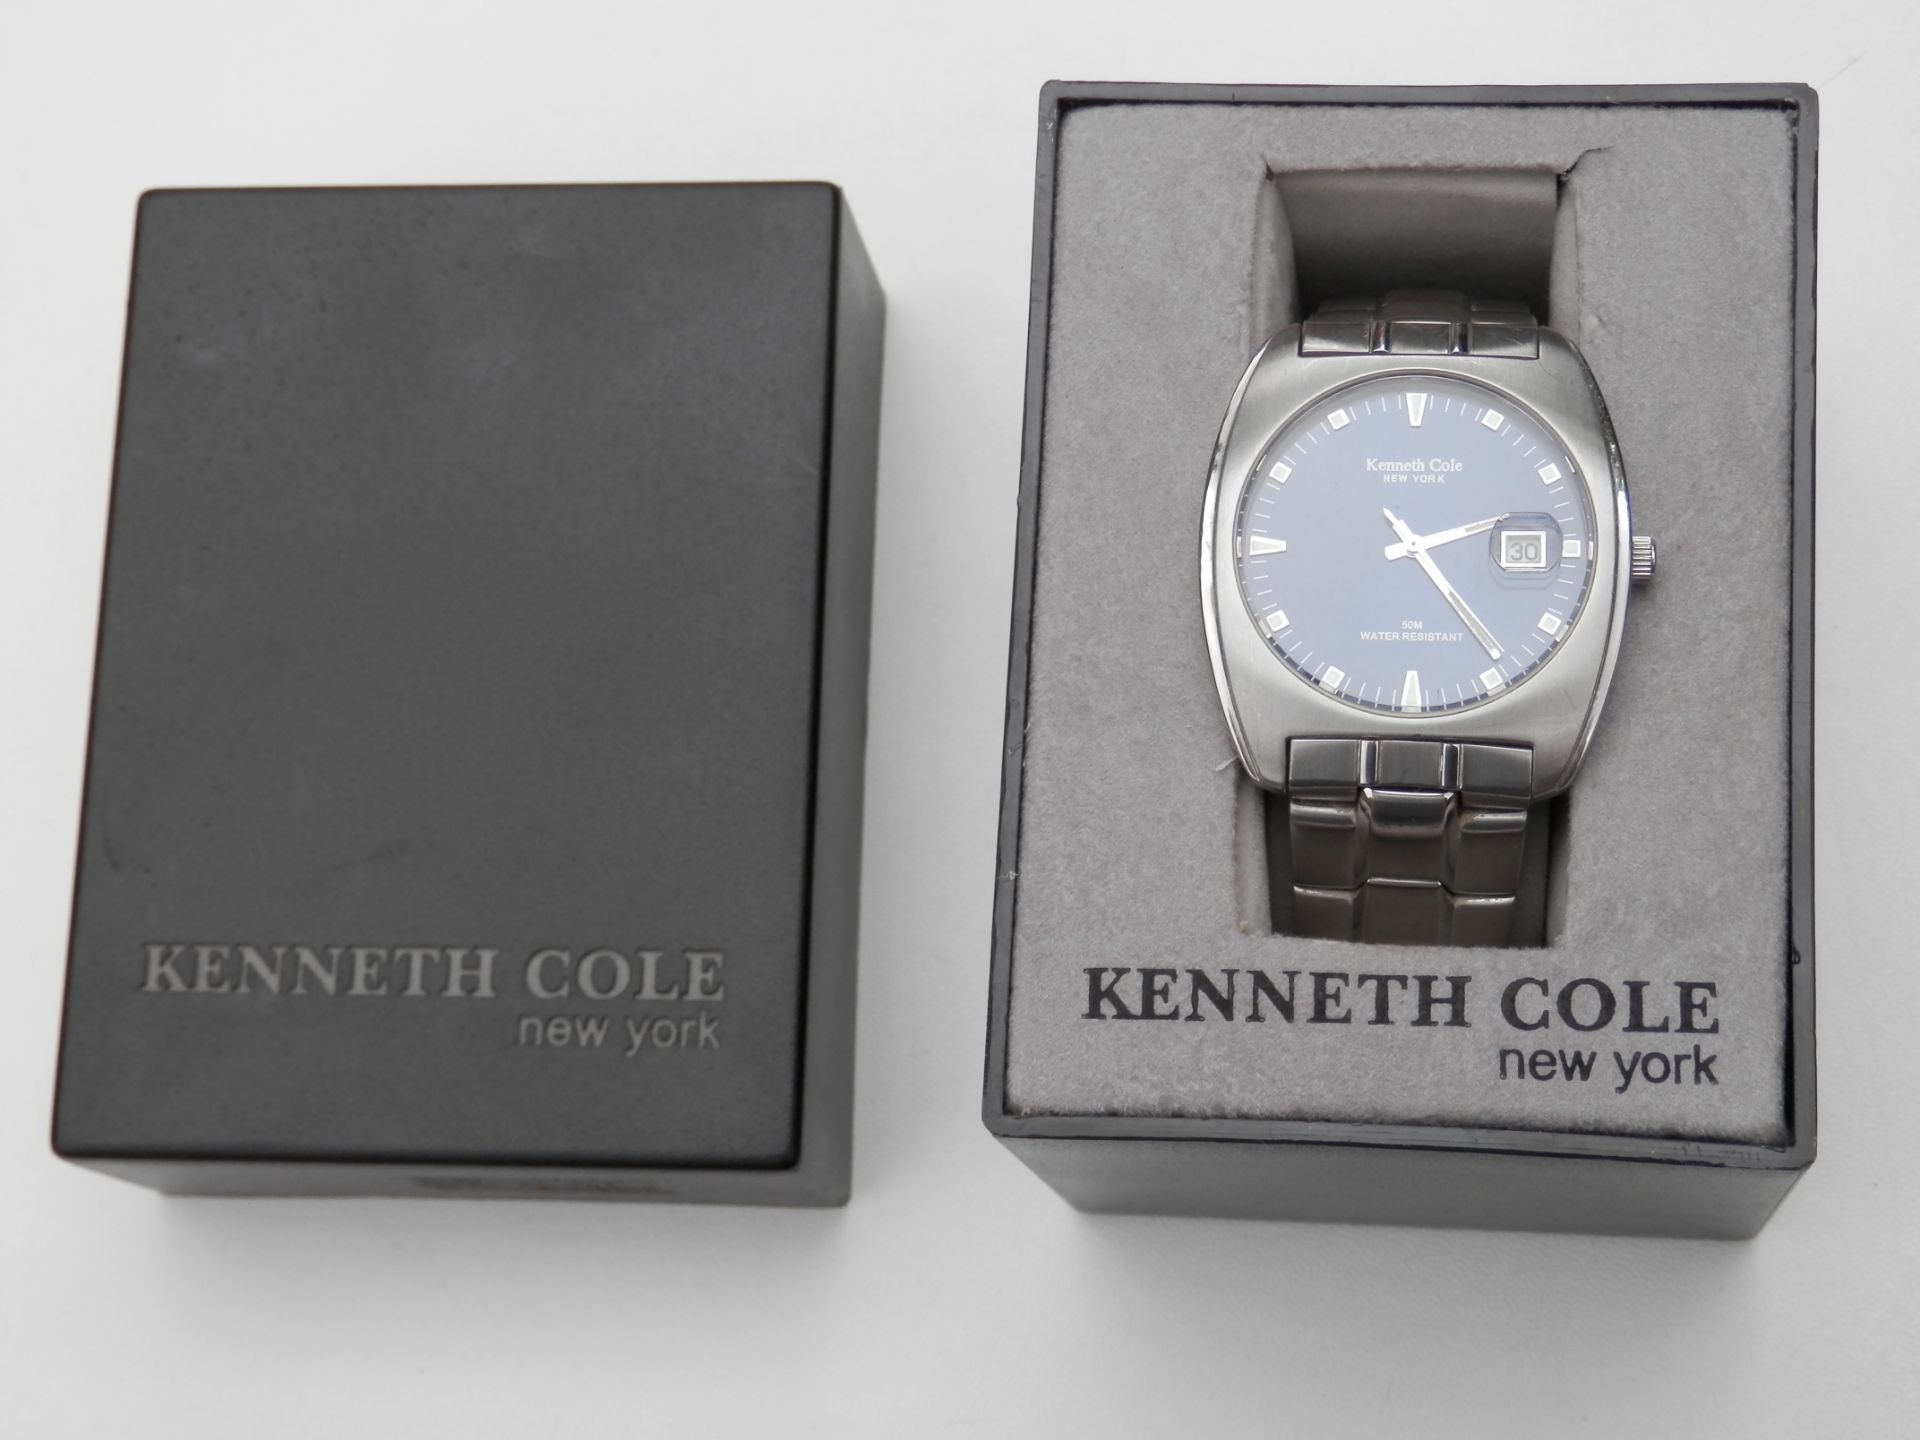 GENTS BOXED KENNETH COLE NEW YORK, FULL STAINLESS 50M WR QUARTZ DATE WATCH, FULLY WORKING. RRP $125 - Image 3 of 11